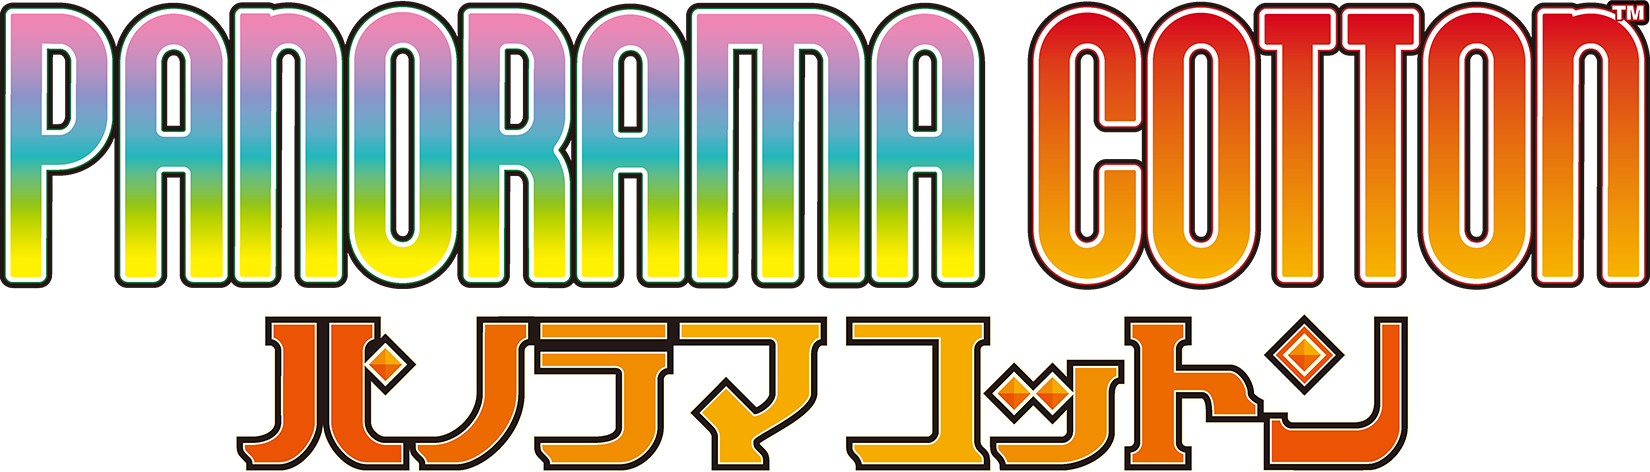 Panorama Cotton Releases Oct 29,Digital and Physical